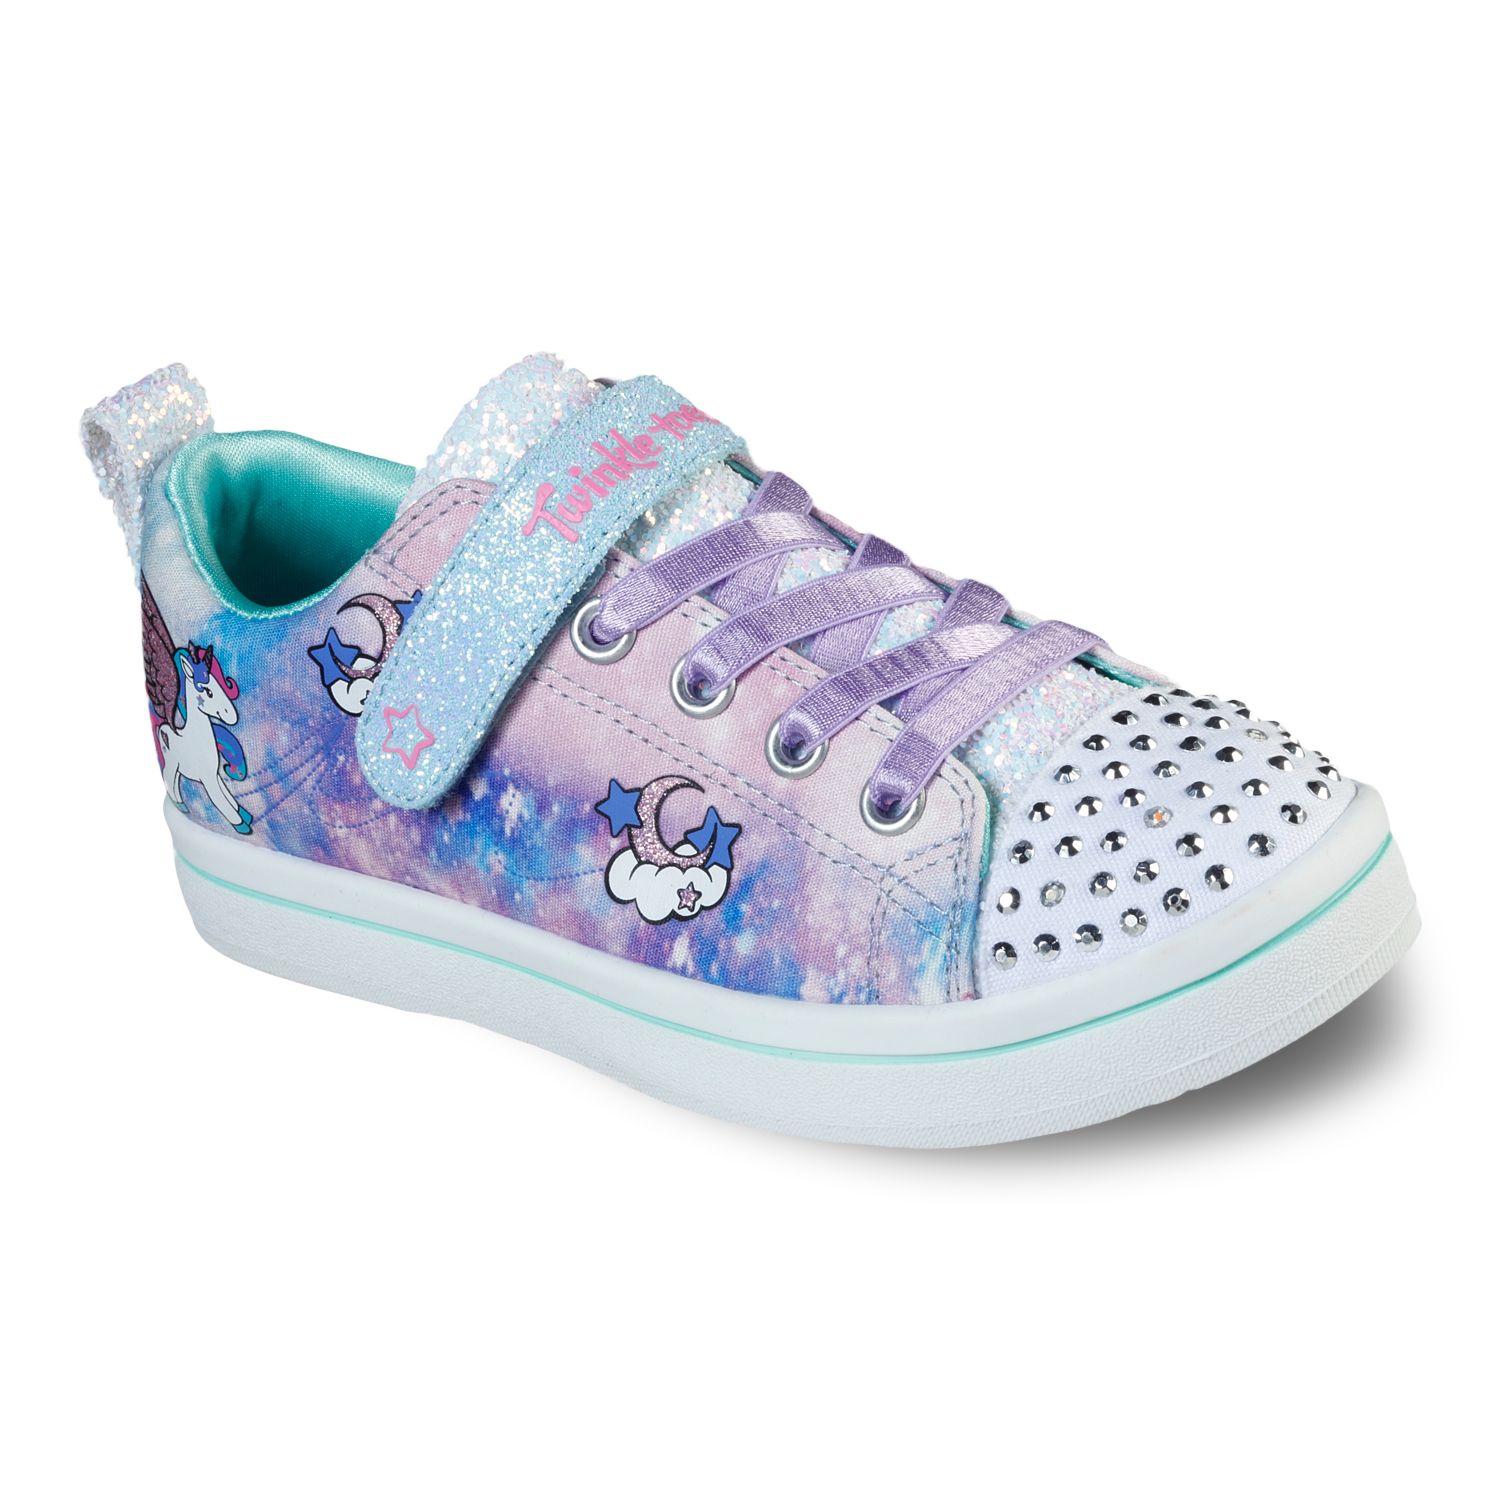 twinkle toes shoes for toddlers